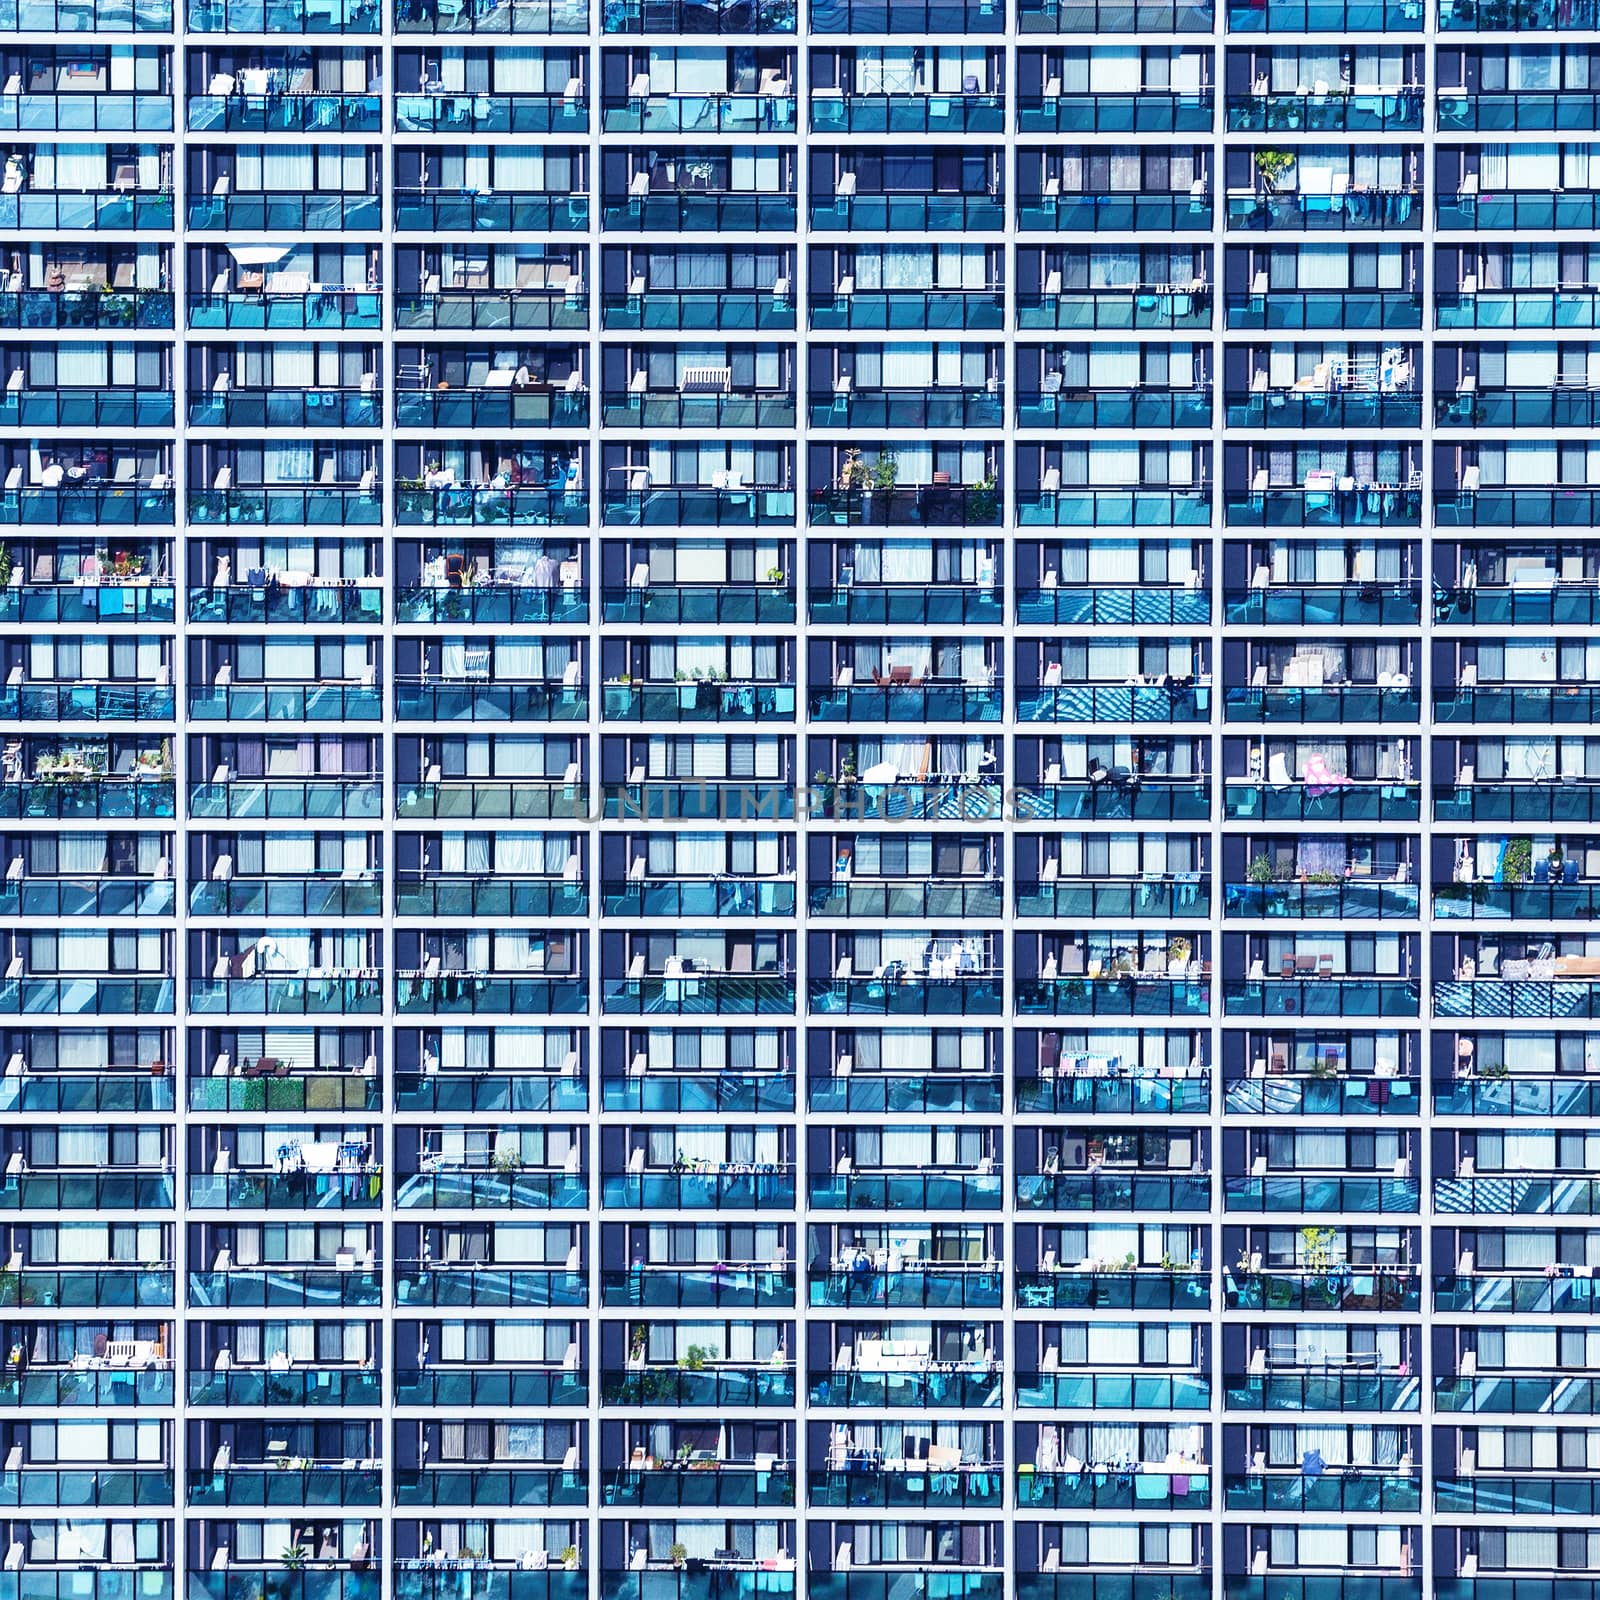 Blue pattern with small balconies and windows in Osaka, Japan